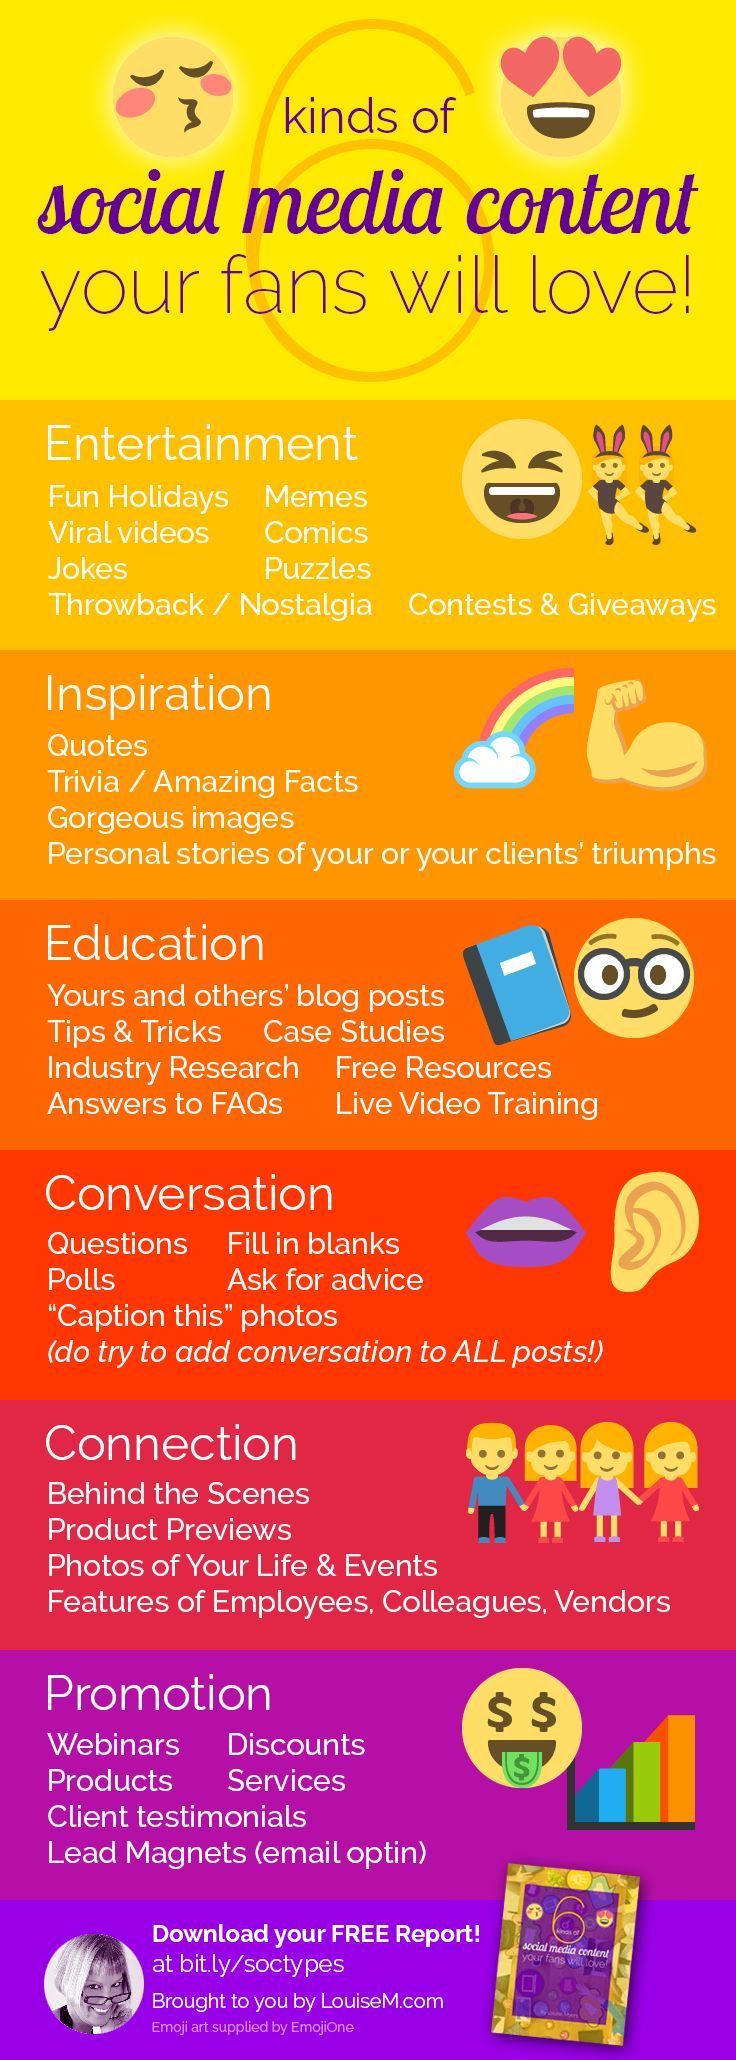 Marketing-Infographic-Social-media-marketing-tips-Click-to-blog-for-FREE-download-with-content-catego Marketing Infographic : Social media marketing tips: Click to blog for FREE download with content catego...